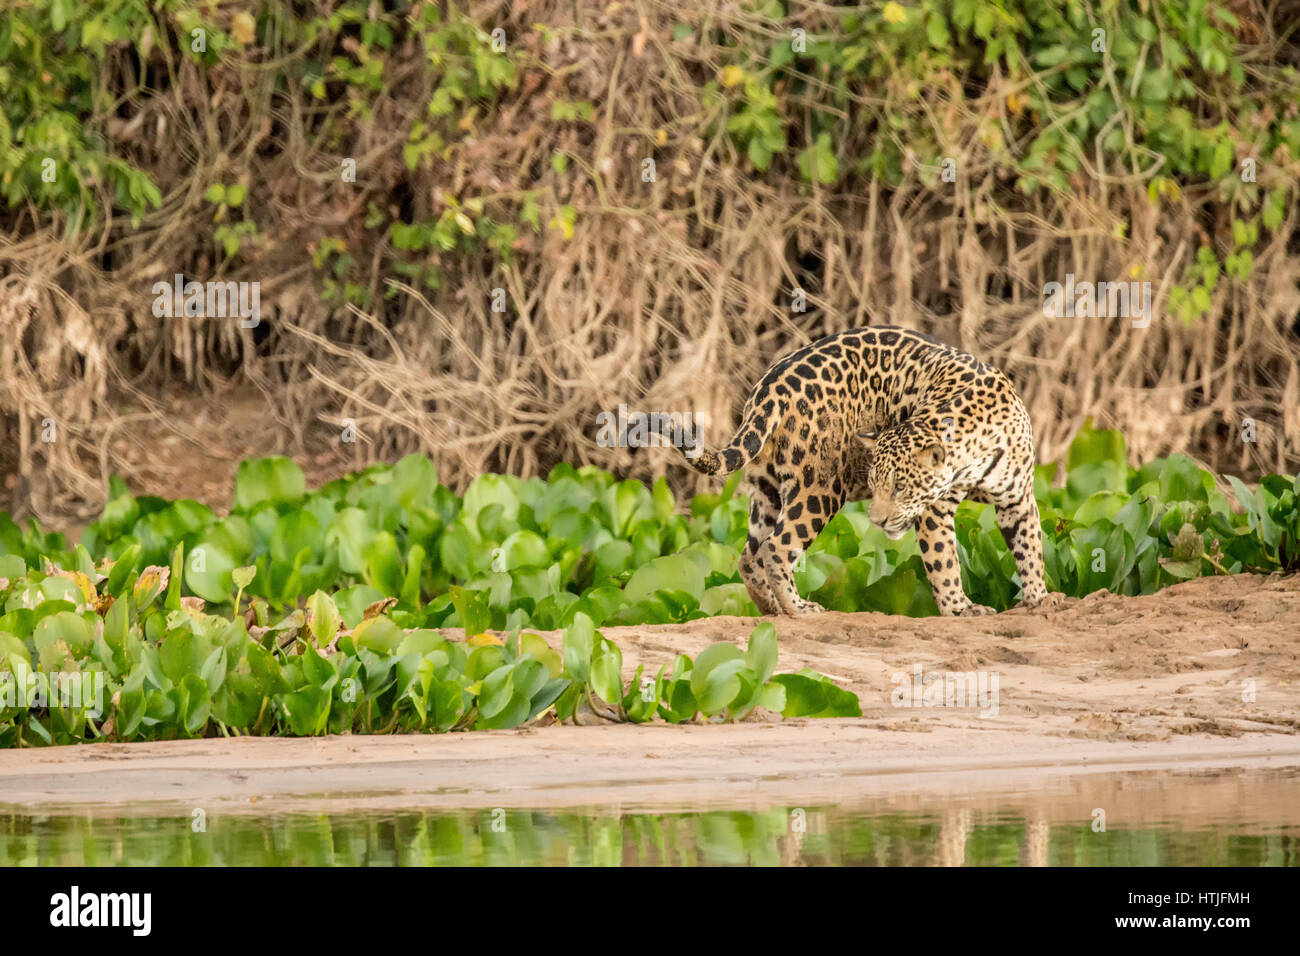 Jaguar deciding to change directions on a sandbar on the Cuiaba River, the Pantanal region, Mato Grosso state, Brazil, South America.  Common Water Hy Stock Photo